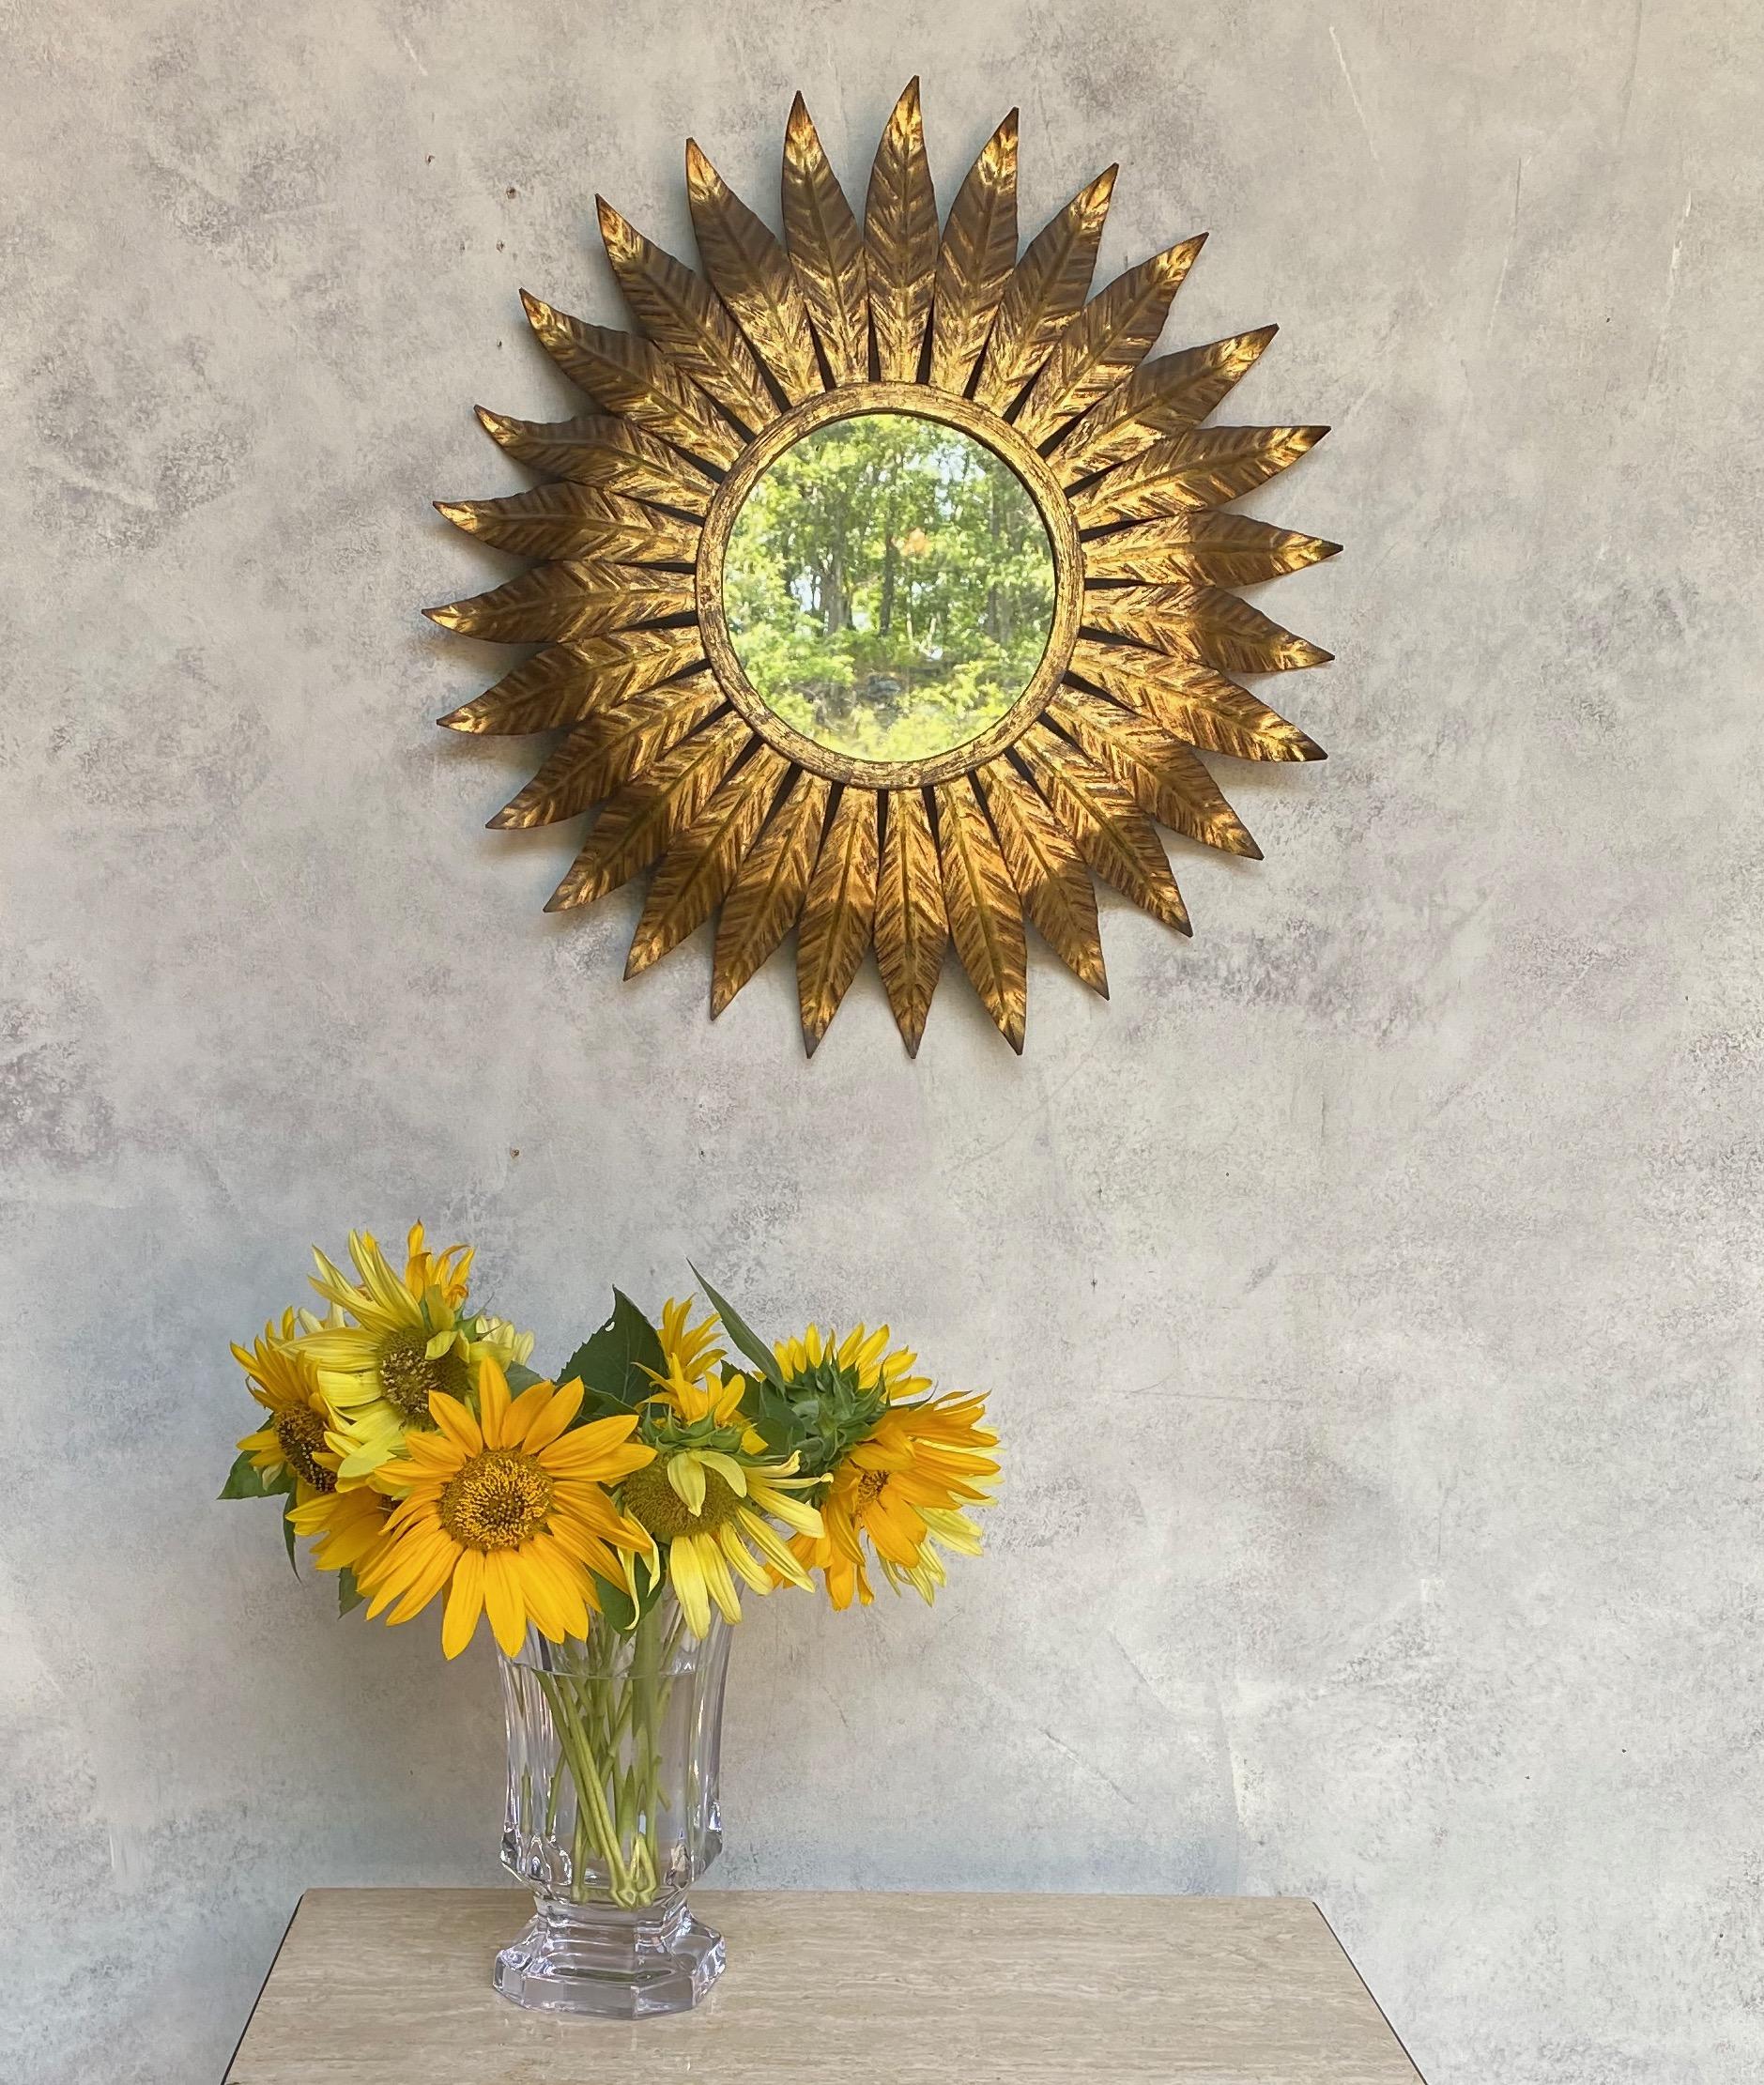 This round gilt metal sunburst mirror, originating from Spain in the 1950s, features long narrow leaves converging in the middle and radiating from a solid border, creating a stunning visual effect. The original glass, showing signs of age, adds to